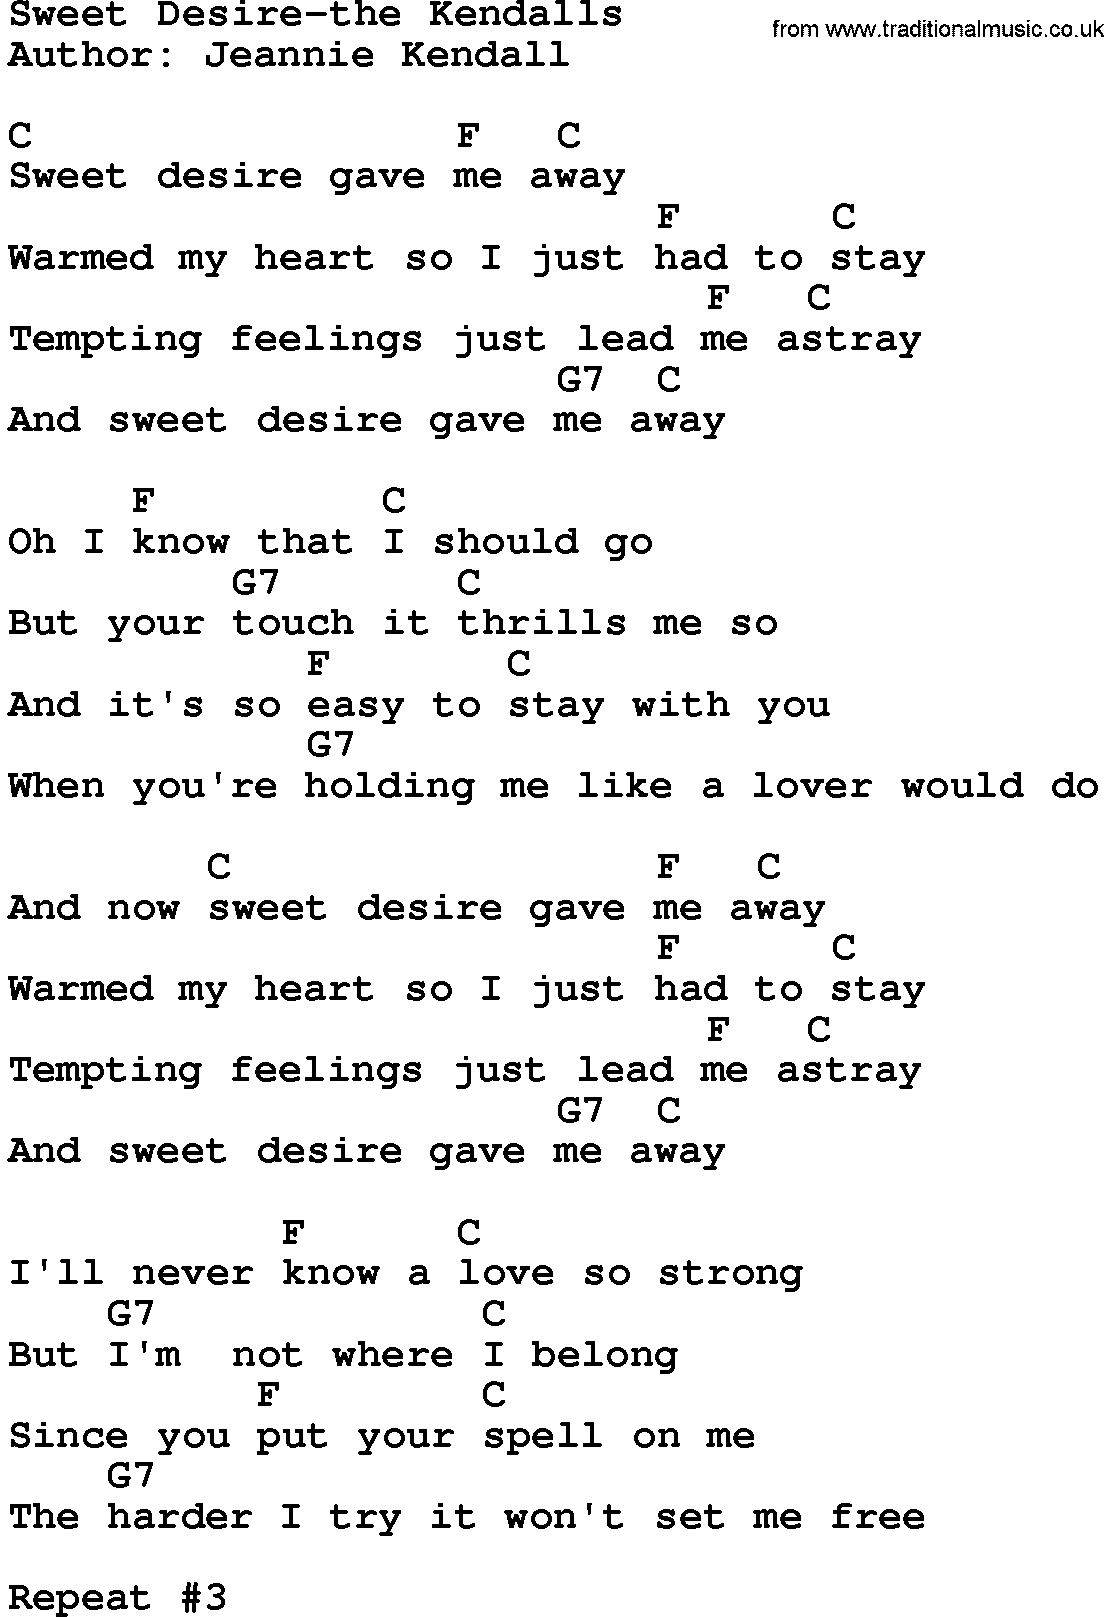 Country music song: Sweet Desire-The Kendalls lyrics and chords